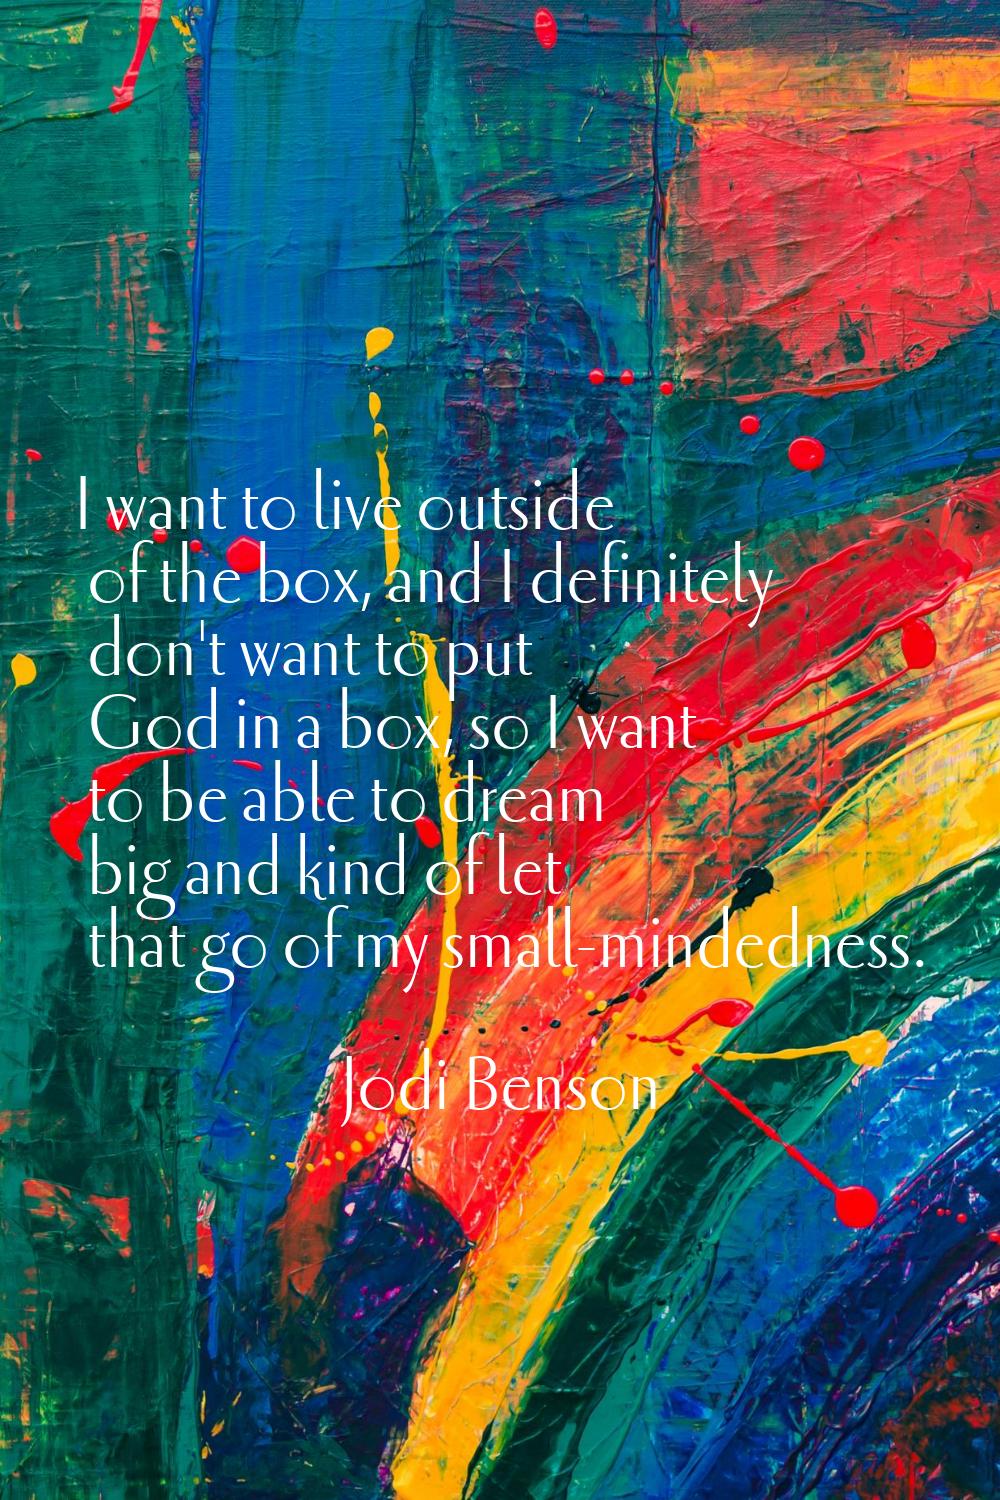 I want to live outside of the box, and I definitely don't want to put God in a box, so I want to be